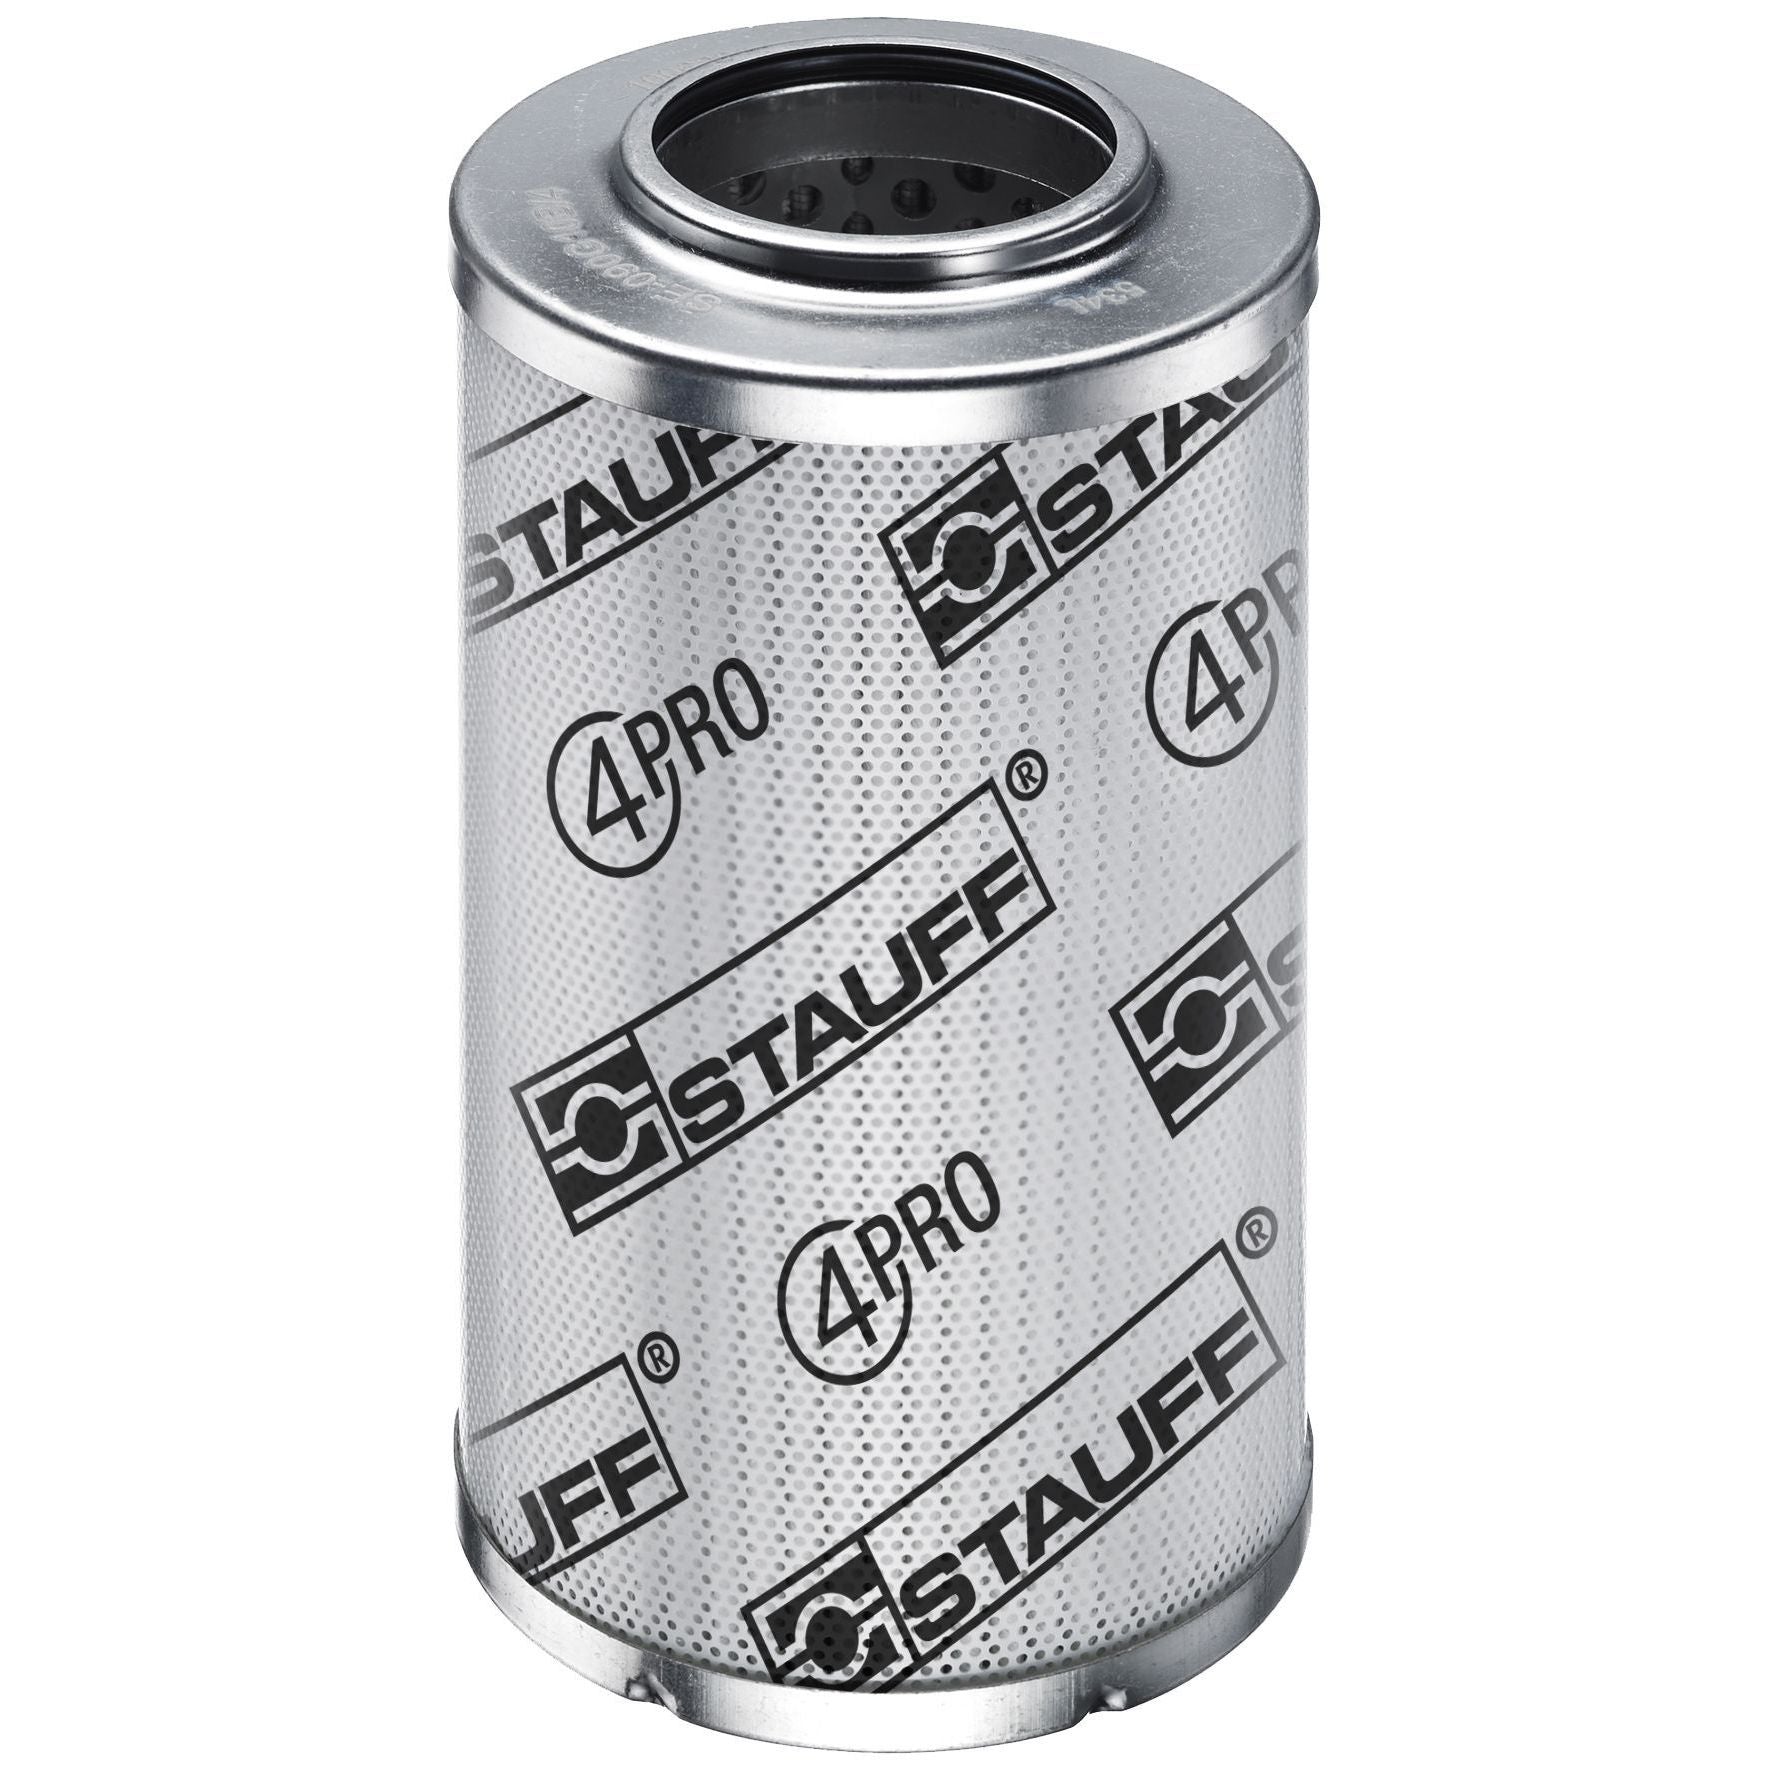 SE-070-G-05-V/4 : Stauff SF-070 Series Filter Element, 5 Micron, Synthetic, 363psi Collapse Differential, Viton Seals